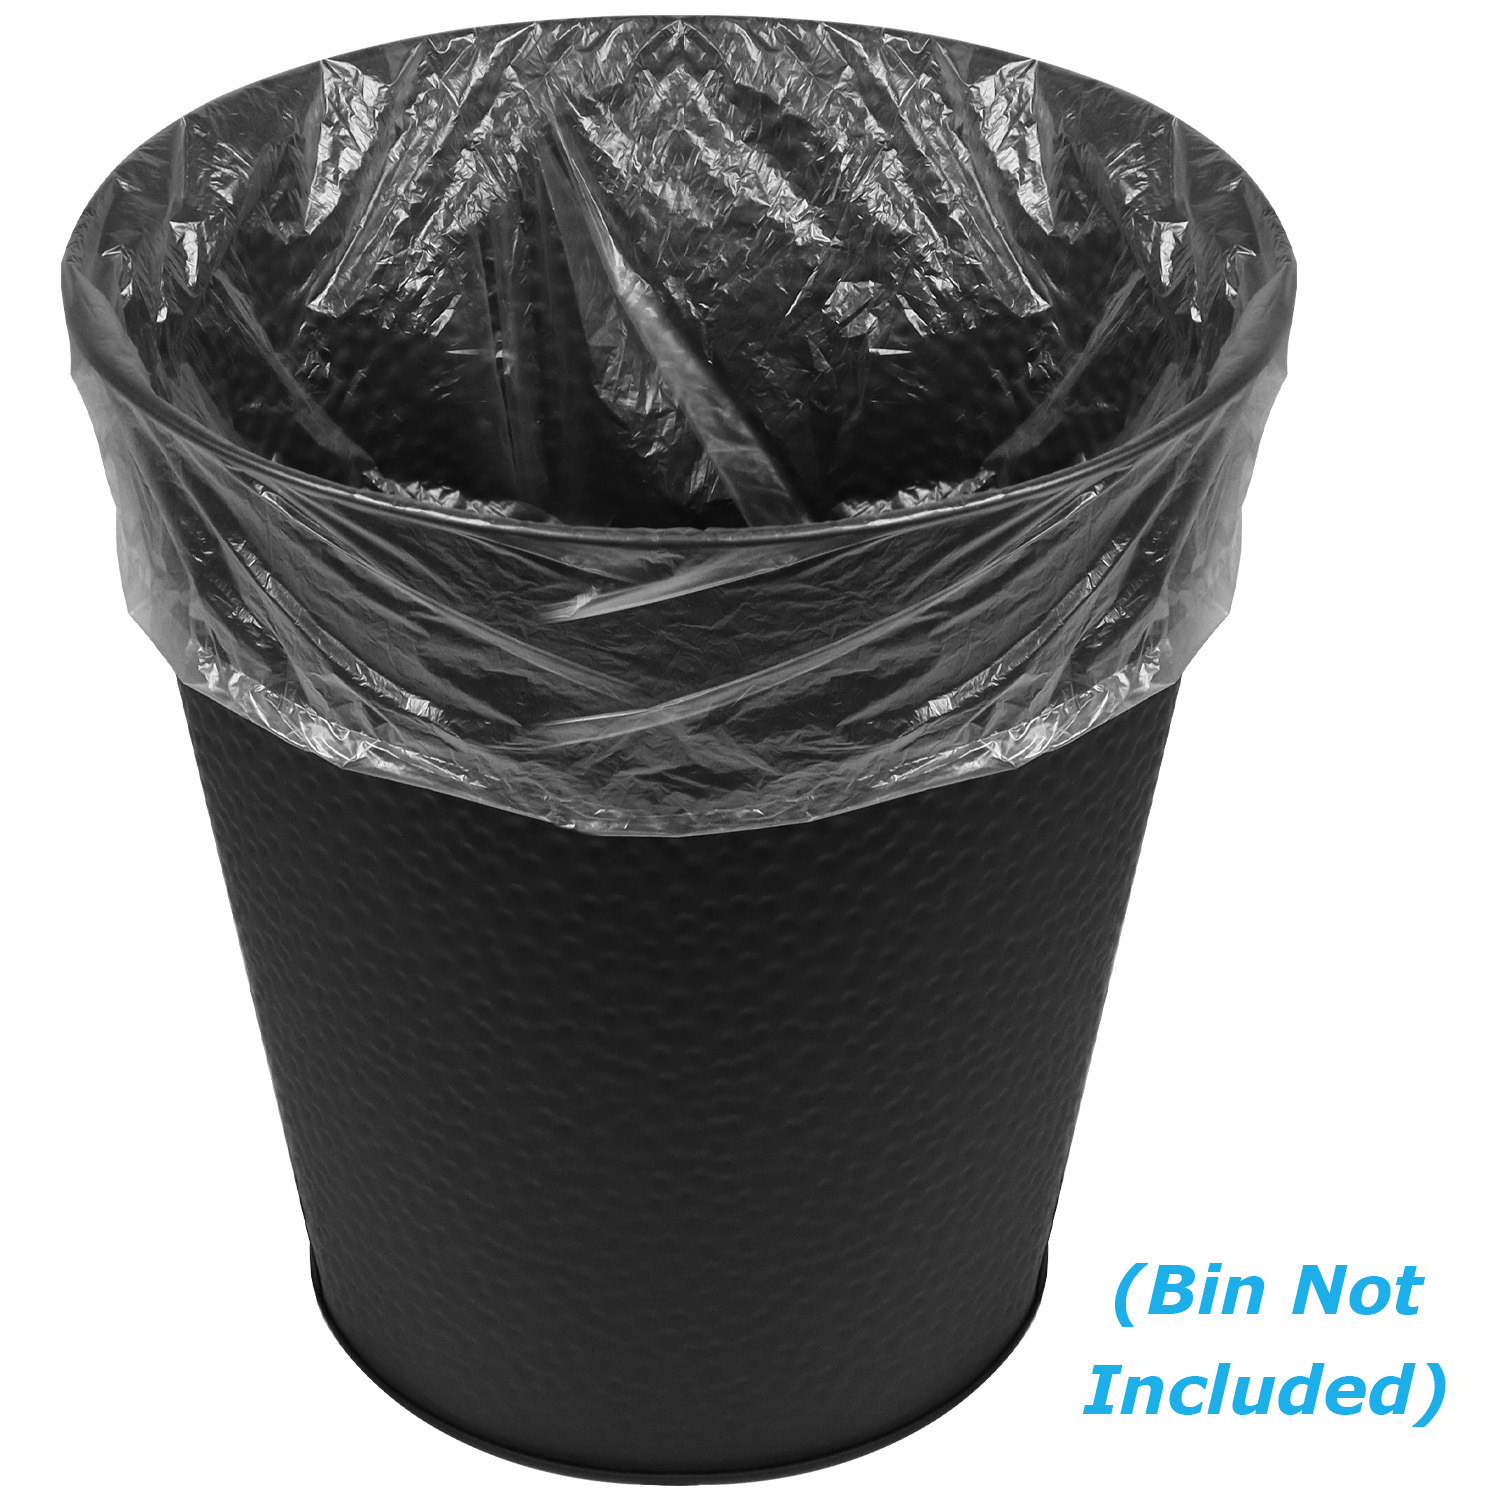 Blue donuts 4 Gallon trash bag 500 count  for bathrooms, offices, and bedrooms 